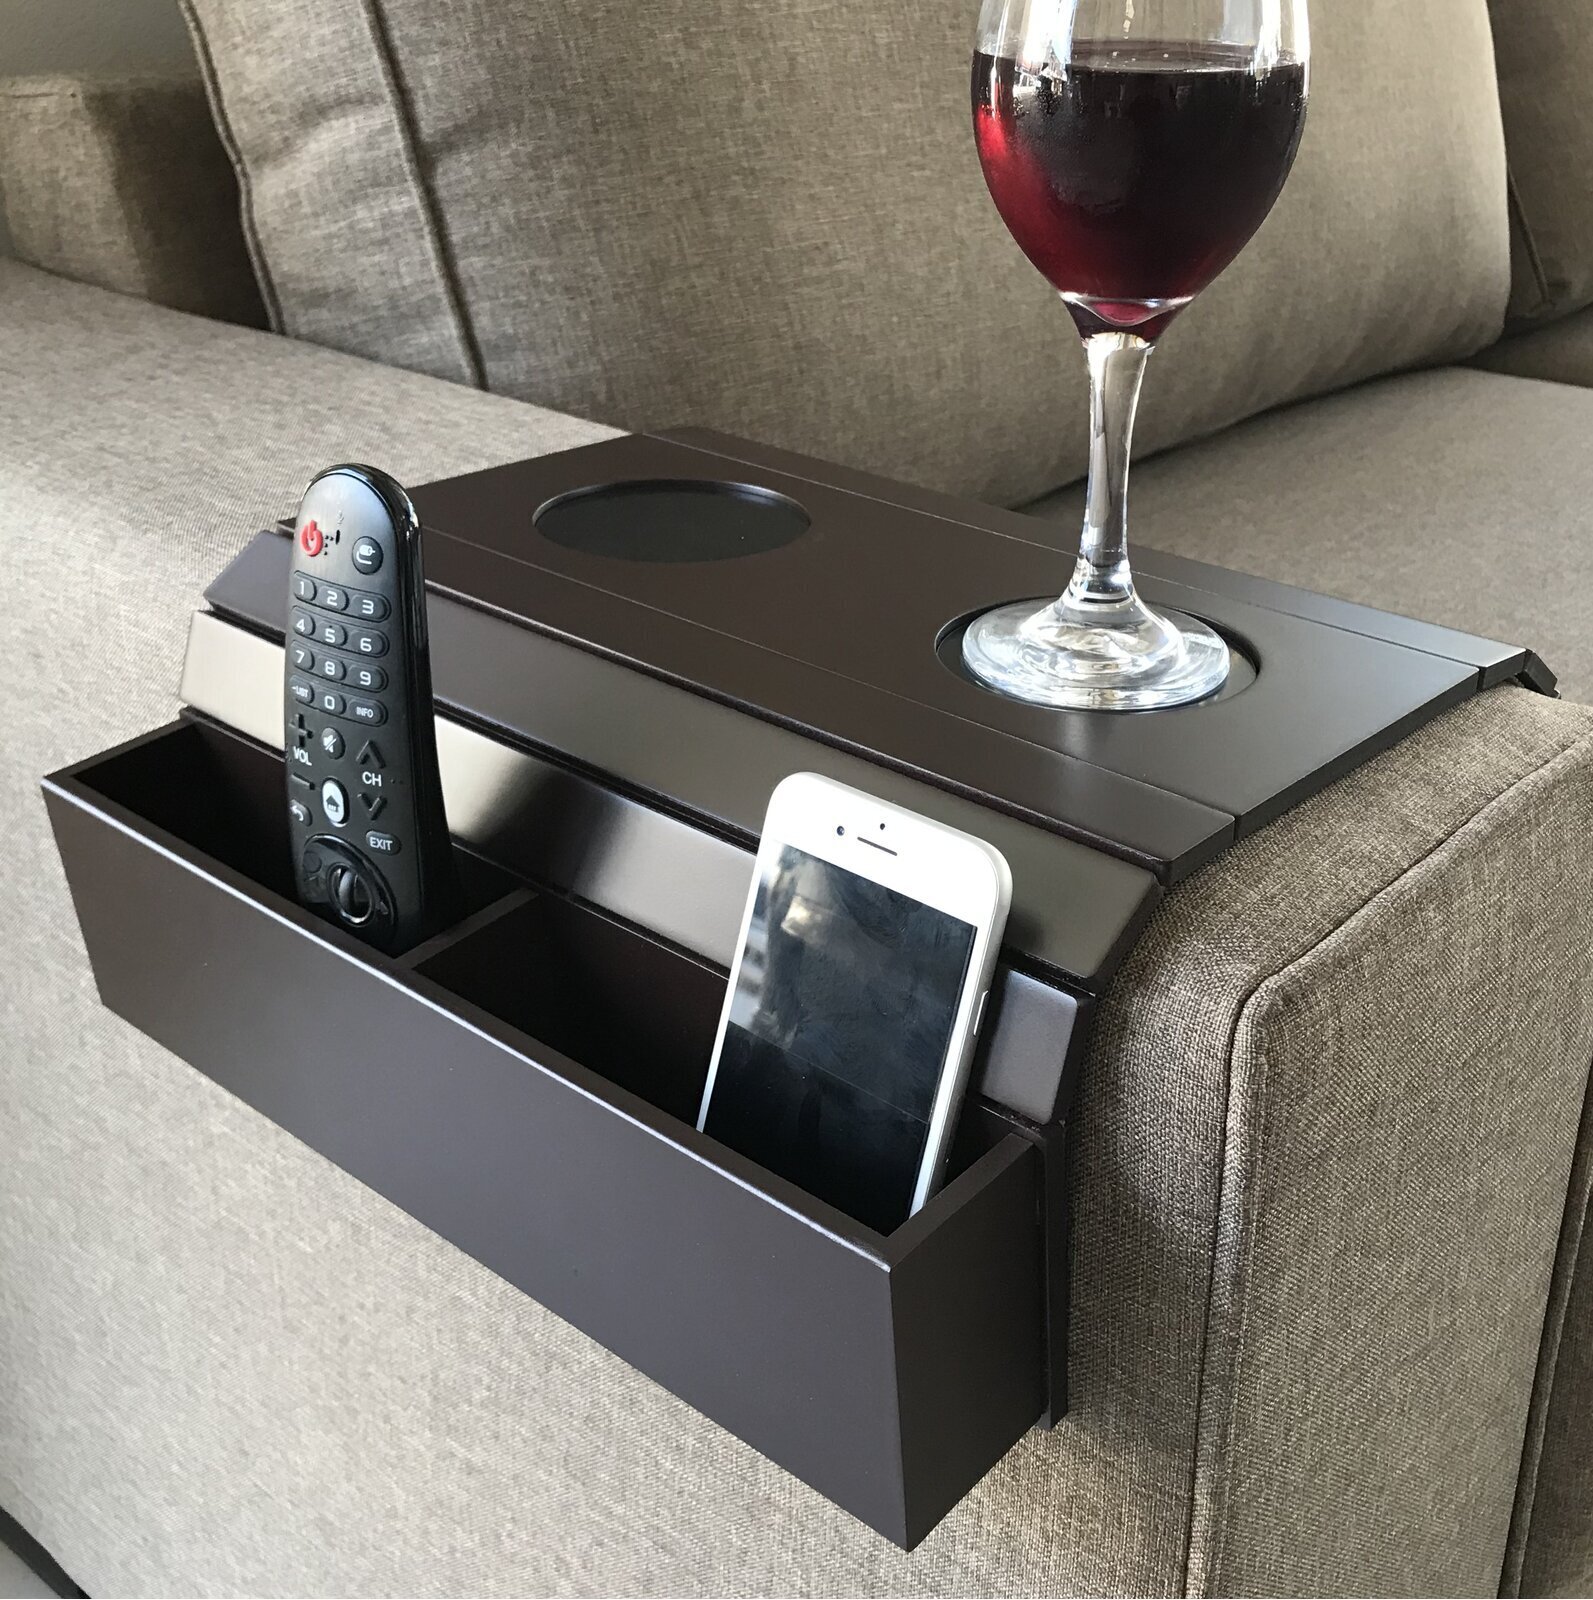 Couch cup holder armrest with room for important stuff